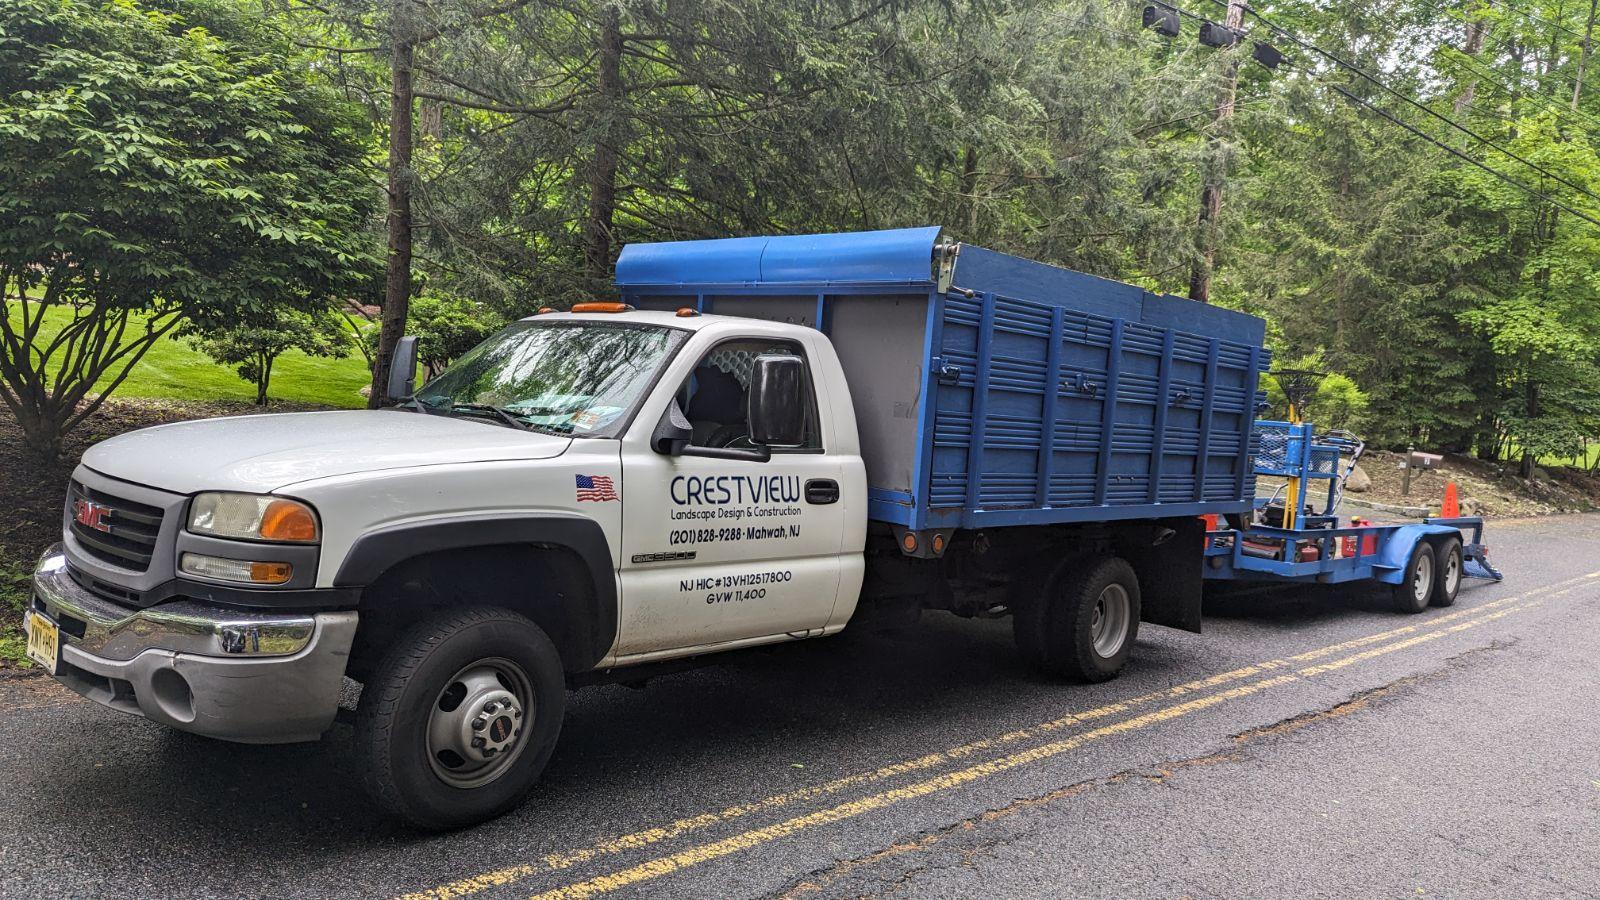 Delivering and Spreading Mulch in Mahwah, NJ